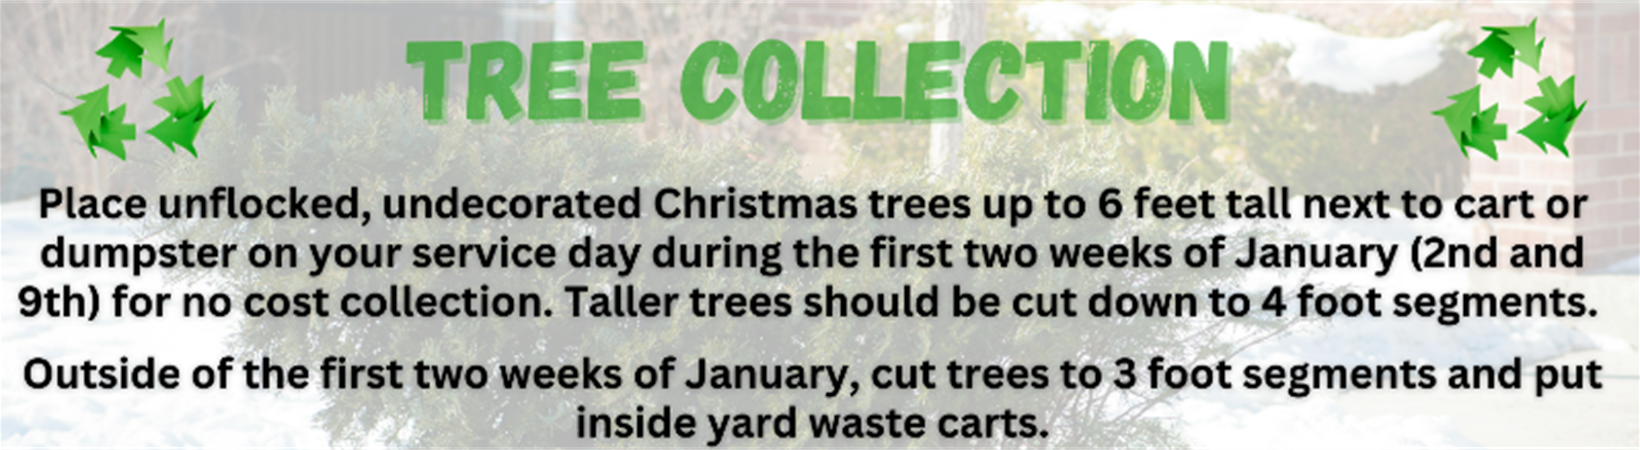 Tree collection infotrees up to 6 feet tall next to cart/dumpster on service day during the first two weeks of January (2nd and 9th) for no cost collection. 